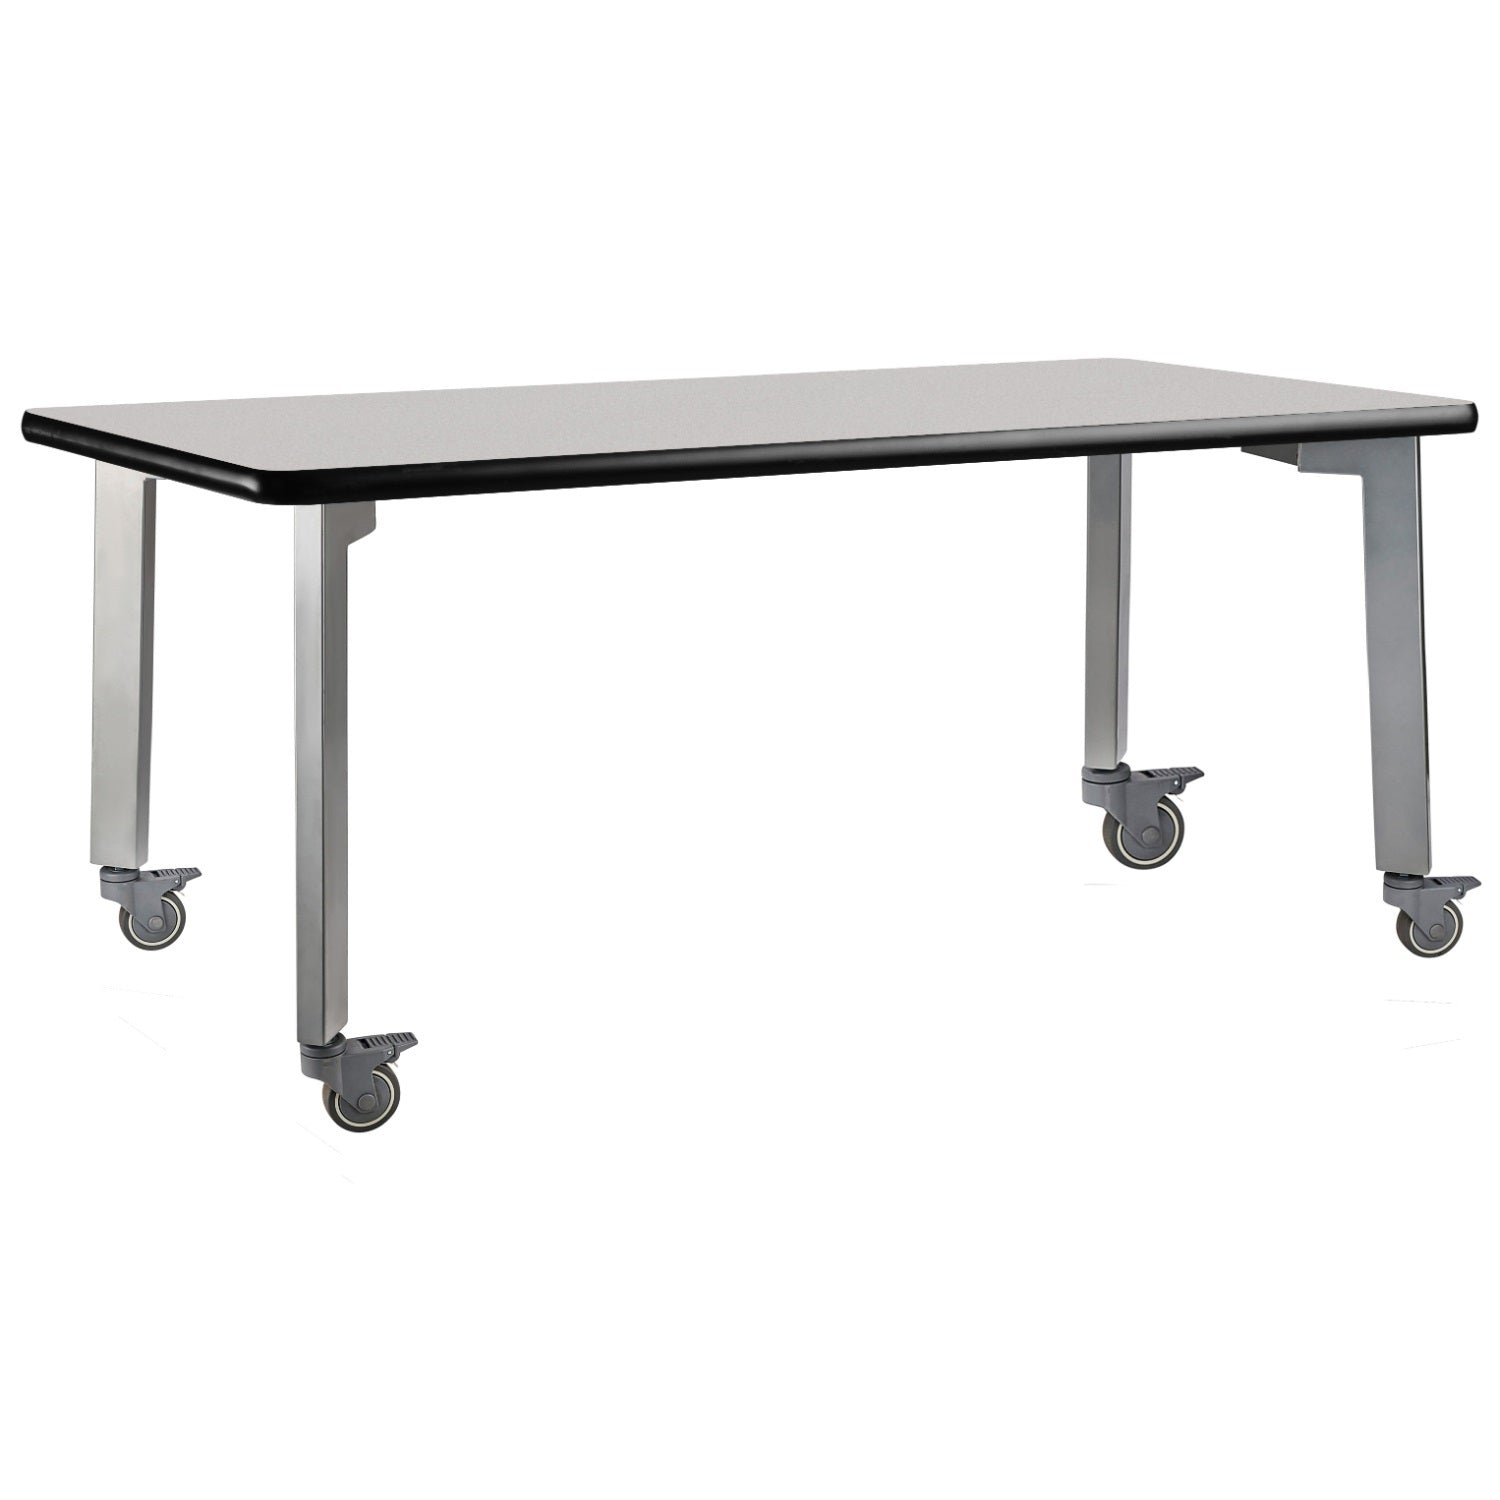 Titan Mobile Table, 48" x 72", Standard High Pressure Laminate Top with Particleboard Core and T-Mold Edge